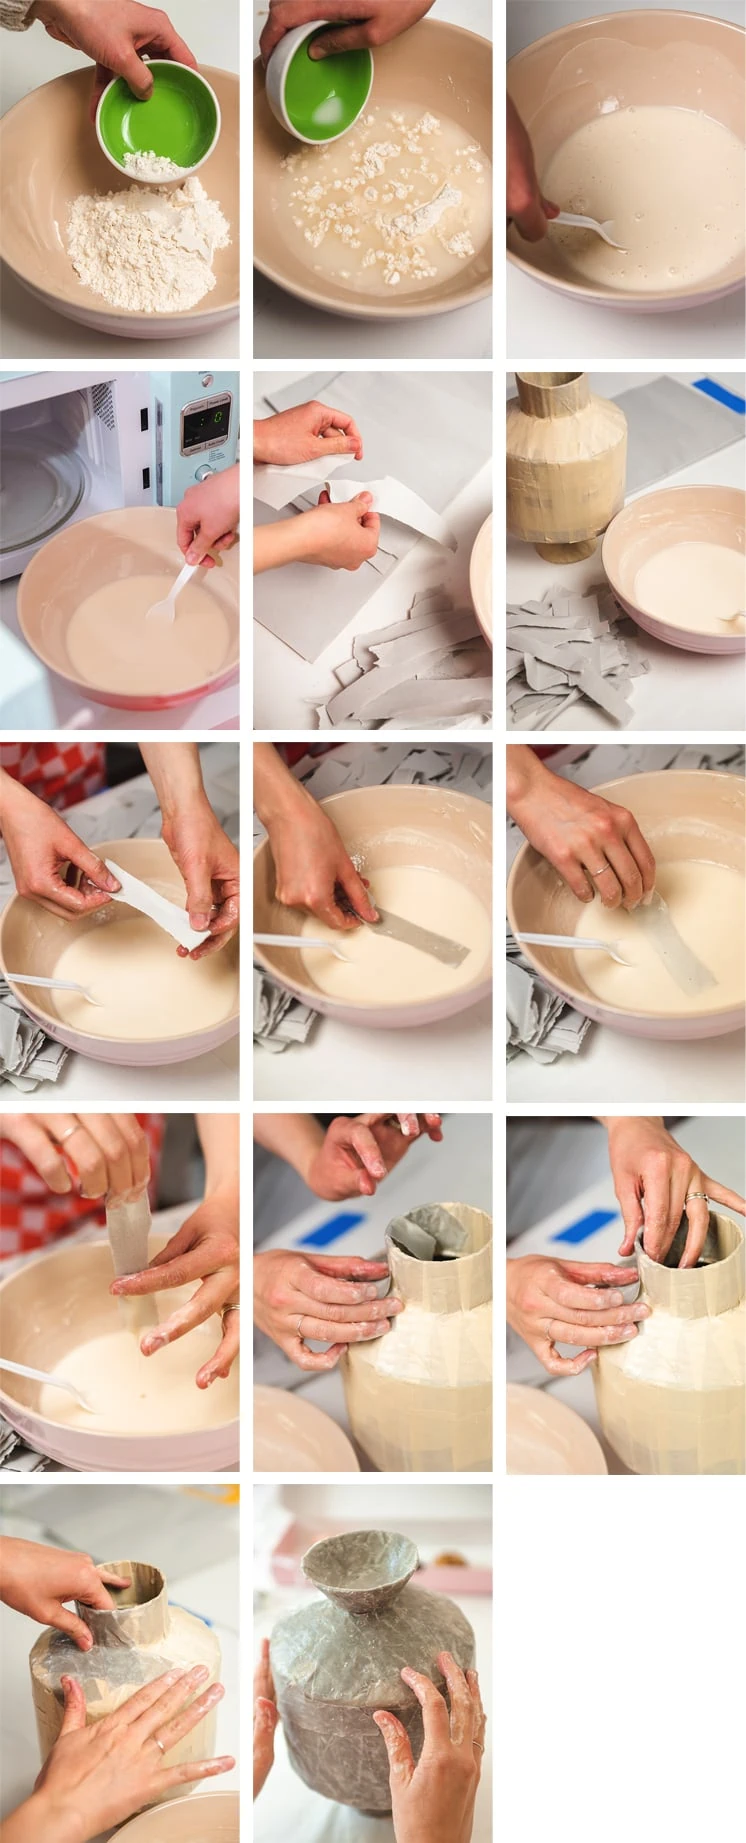 How to Make Paper Mache - The Easy Way